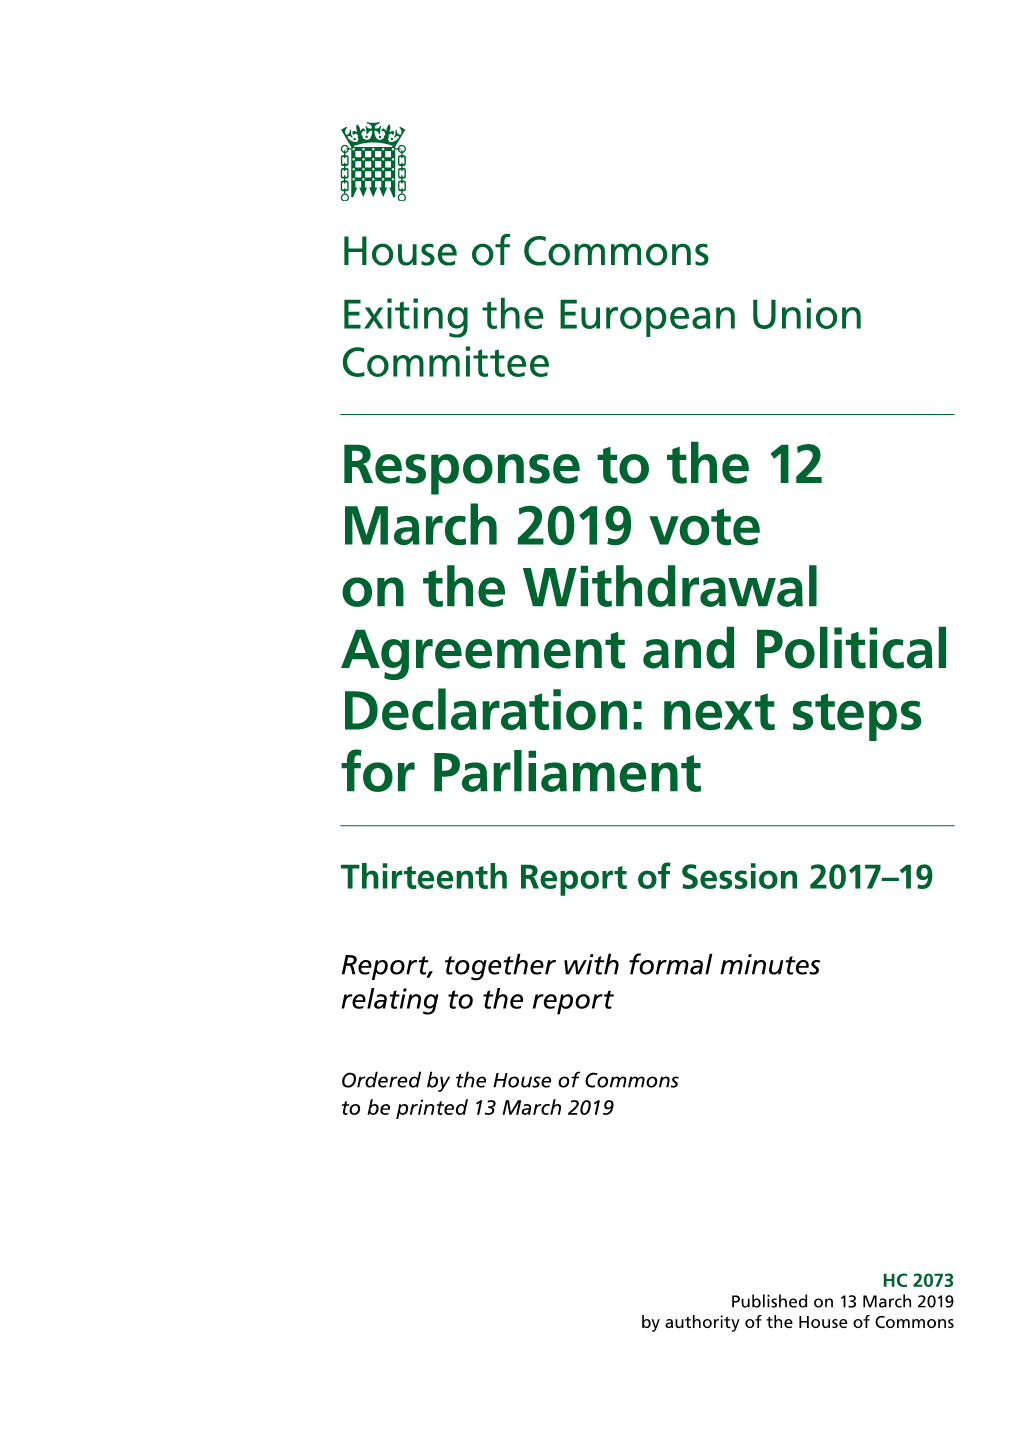 Response to the 12 March 2019 Vote on the Withdrawal Agreement and Political Declaration: Next Steps for Parliament